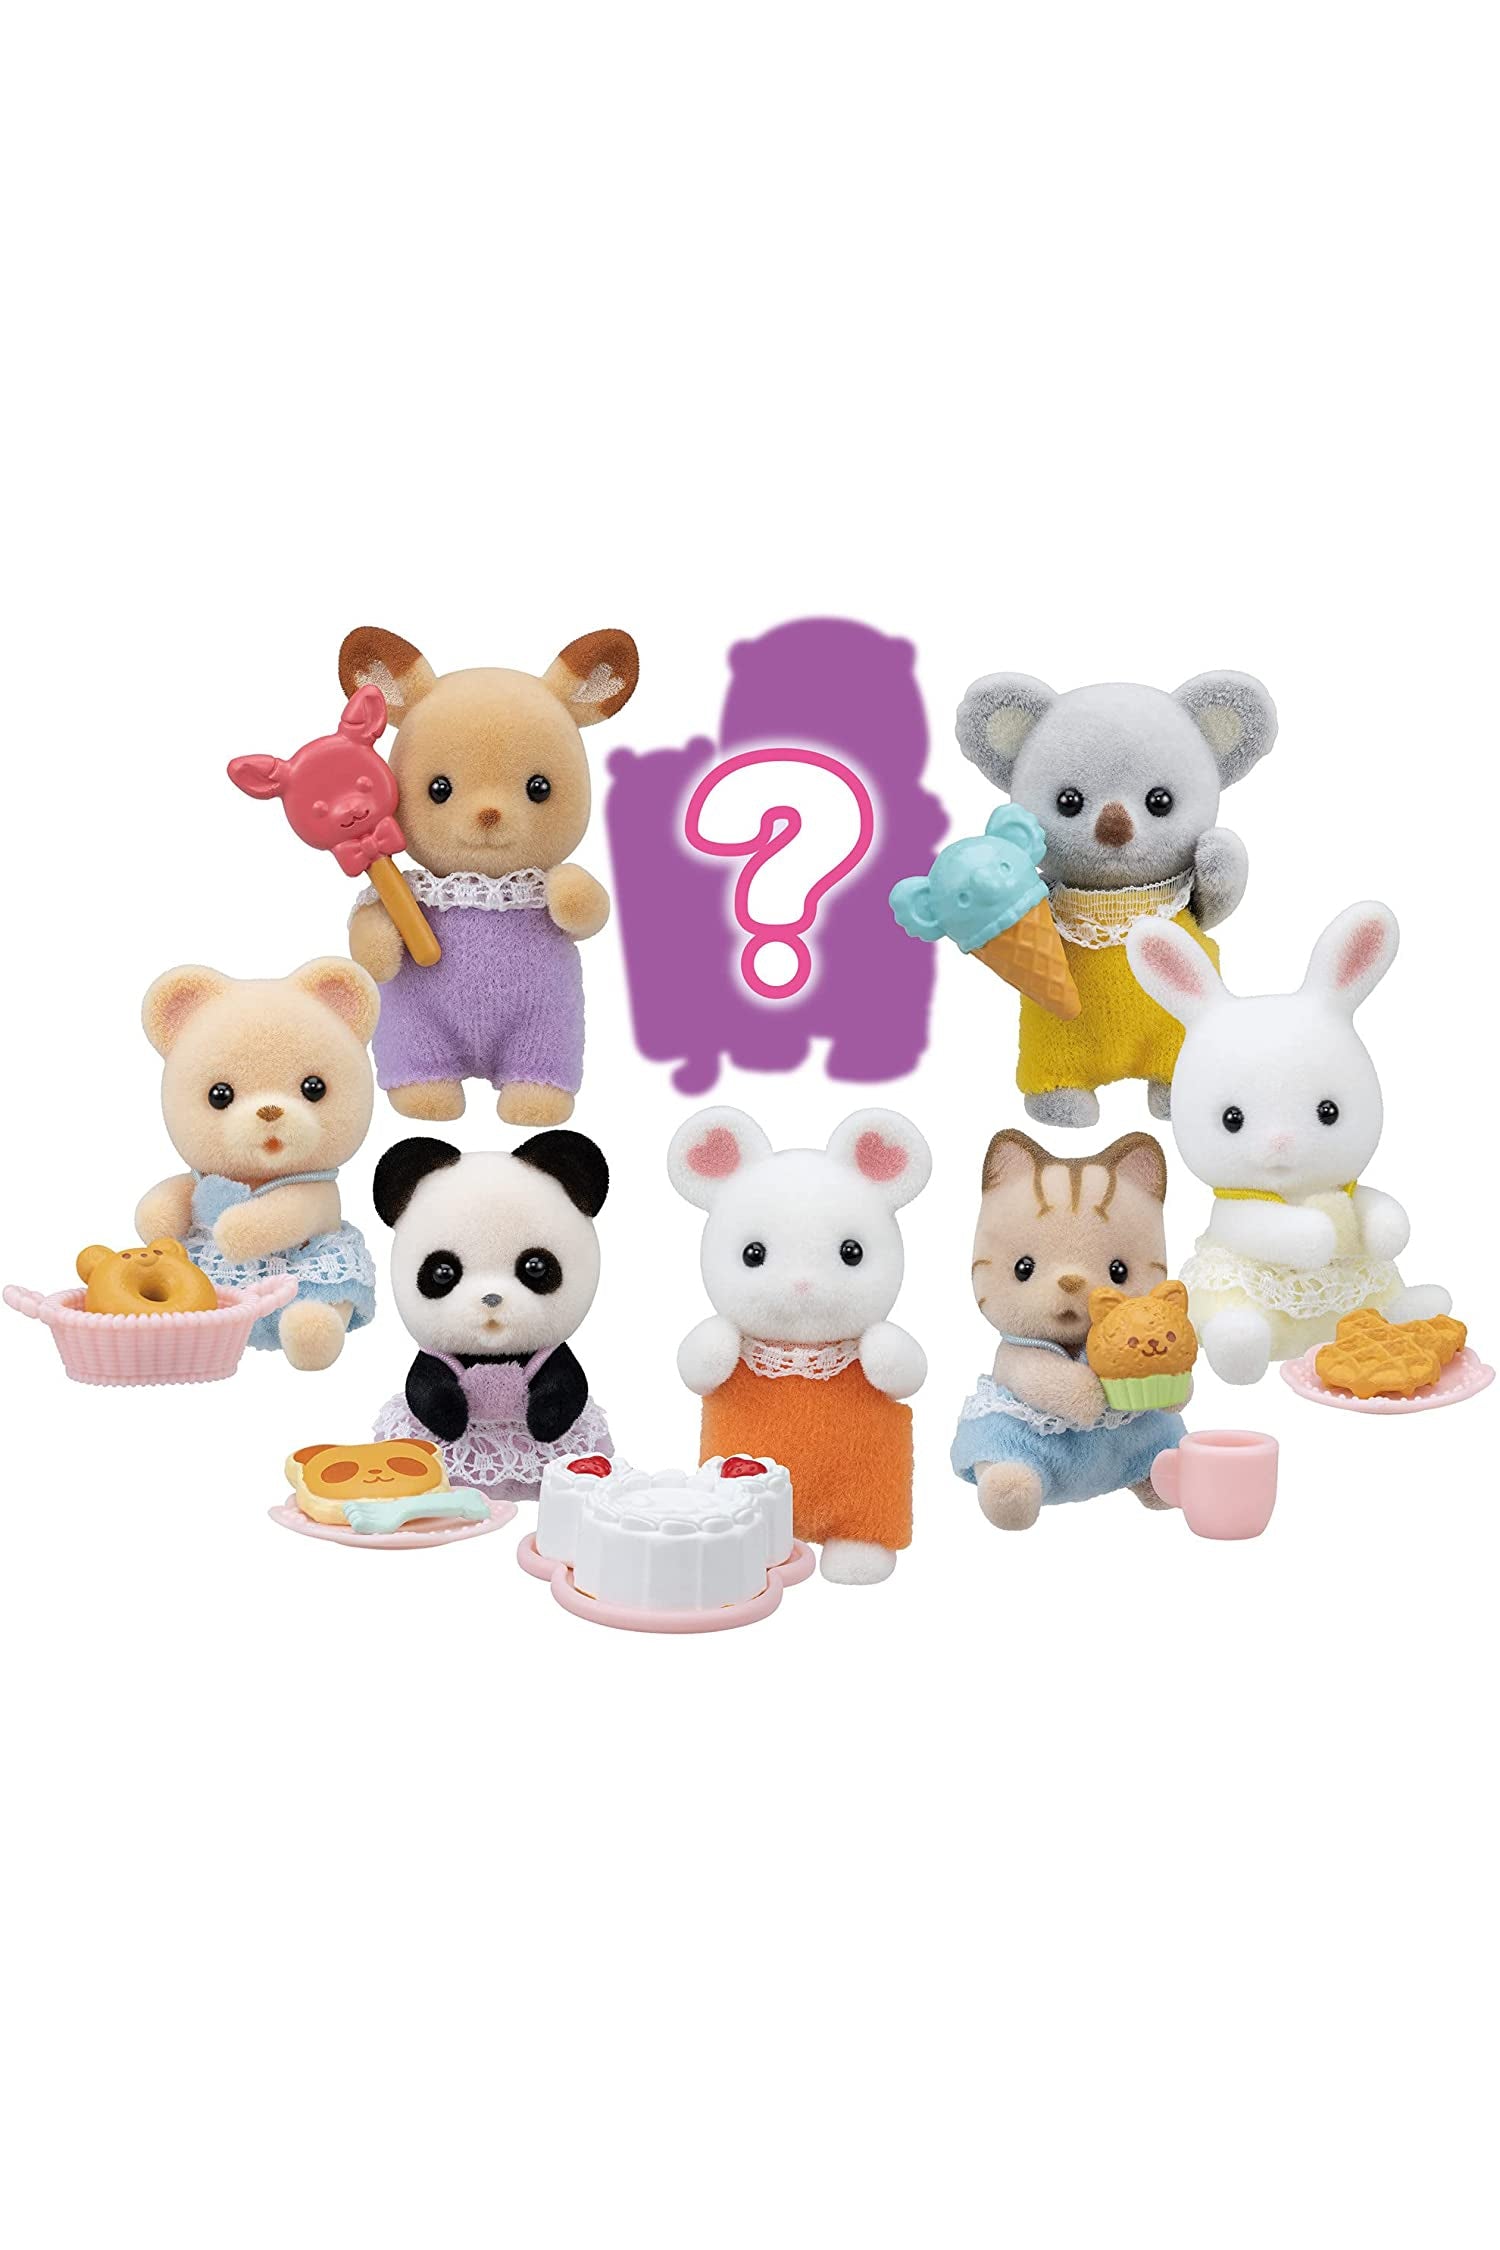 CALICO CRITTERS Blind Bag Multiple Series YOU PICK! UPDATED 8/18